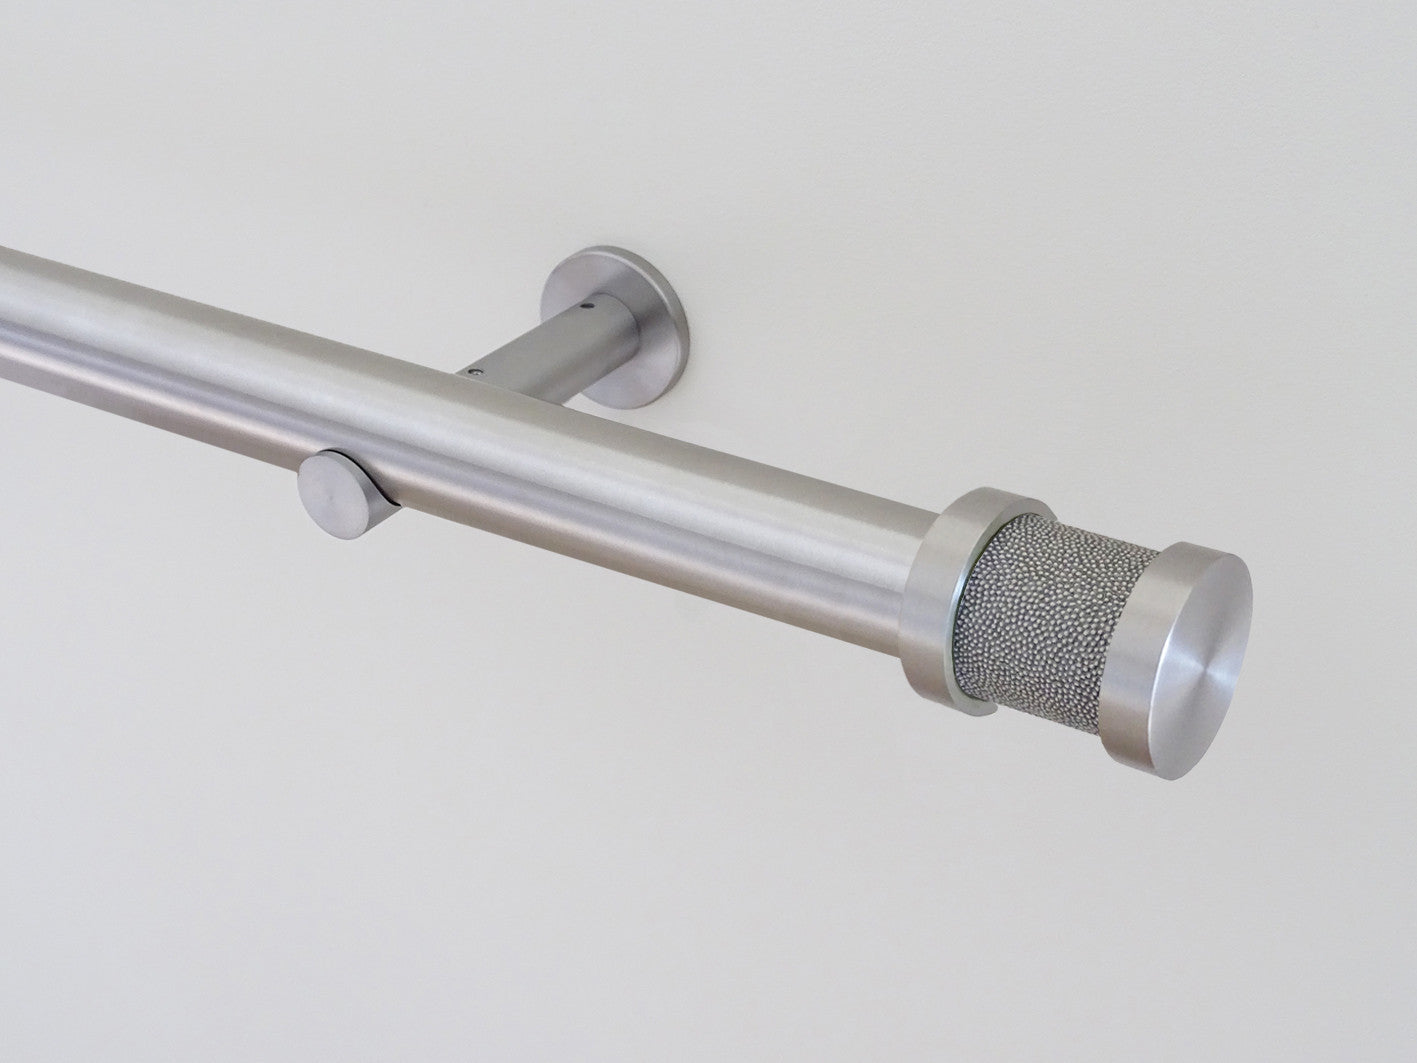 30mm diameter stainless steel curtain pole collection with dusk Groove finials